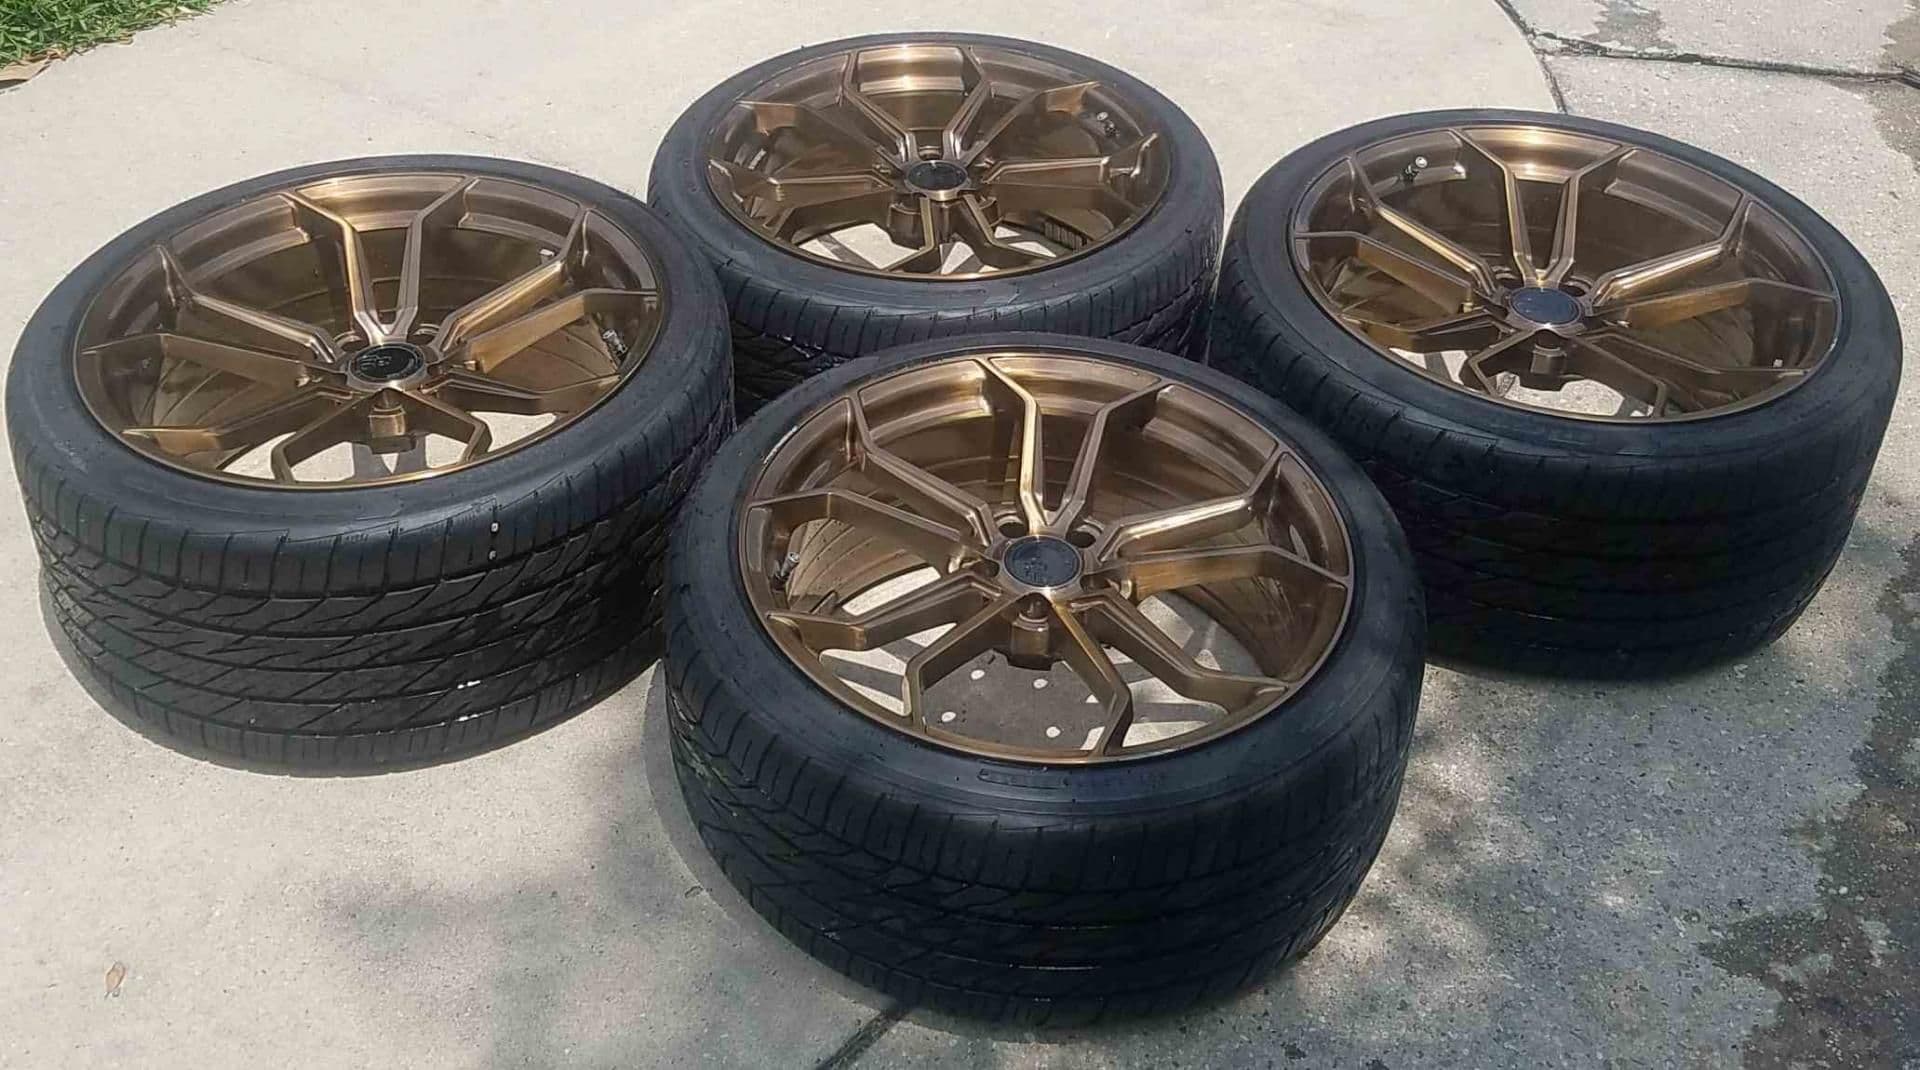 Wheels and Tires/Axles - Gorgeous custom bronze wheels and tires! - Used - New Orleans, LA 70124, United States